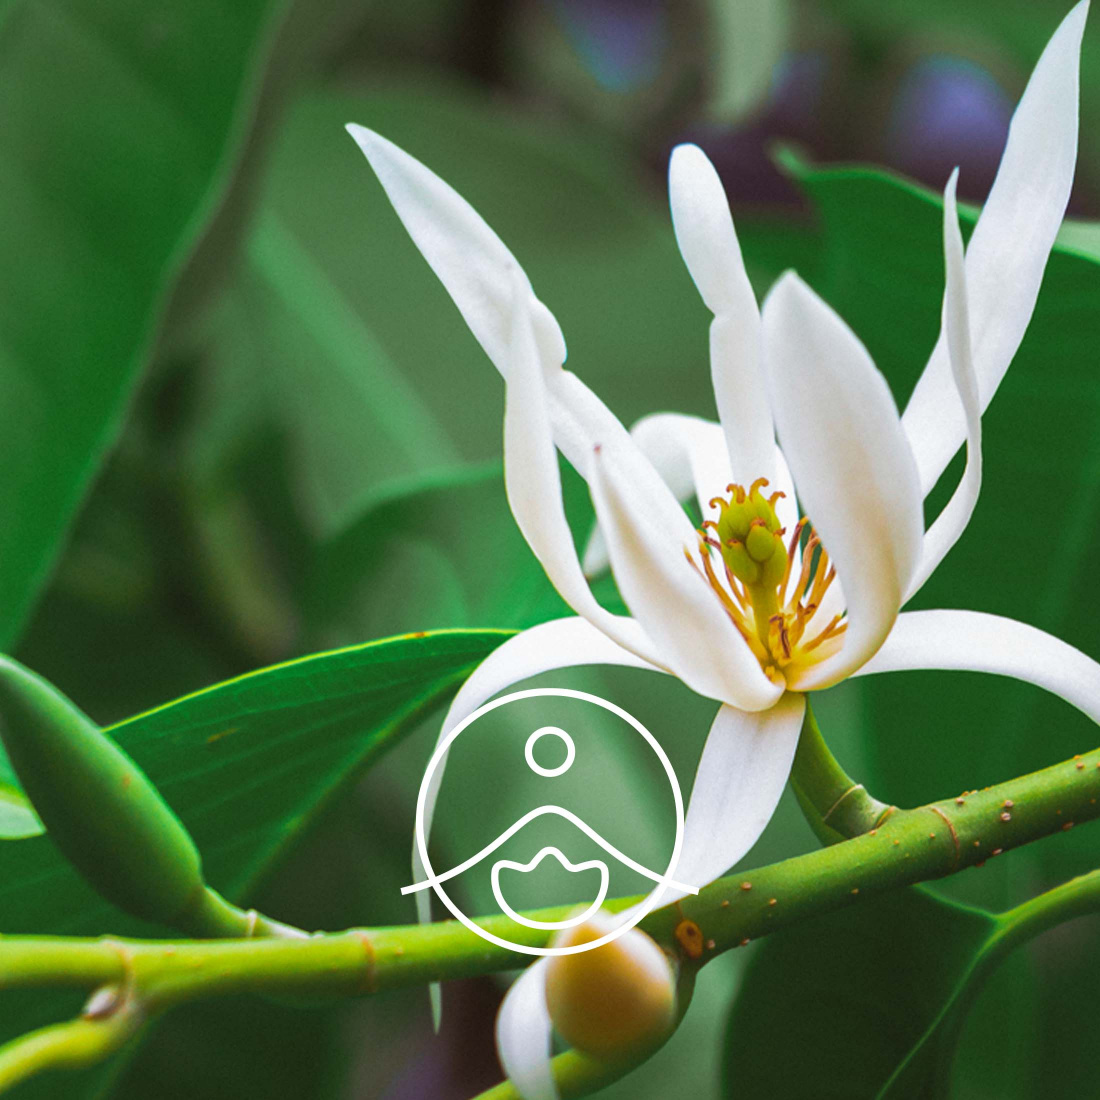 Magnolia Essential Oil - Uses and Benefits - The Prickly Pilot's Wife